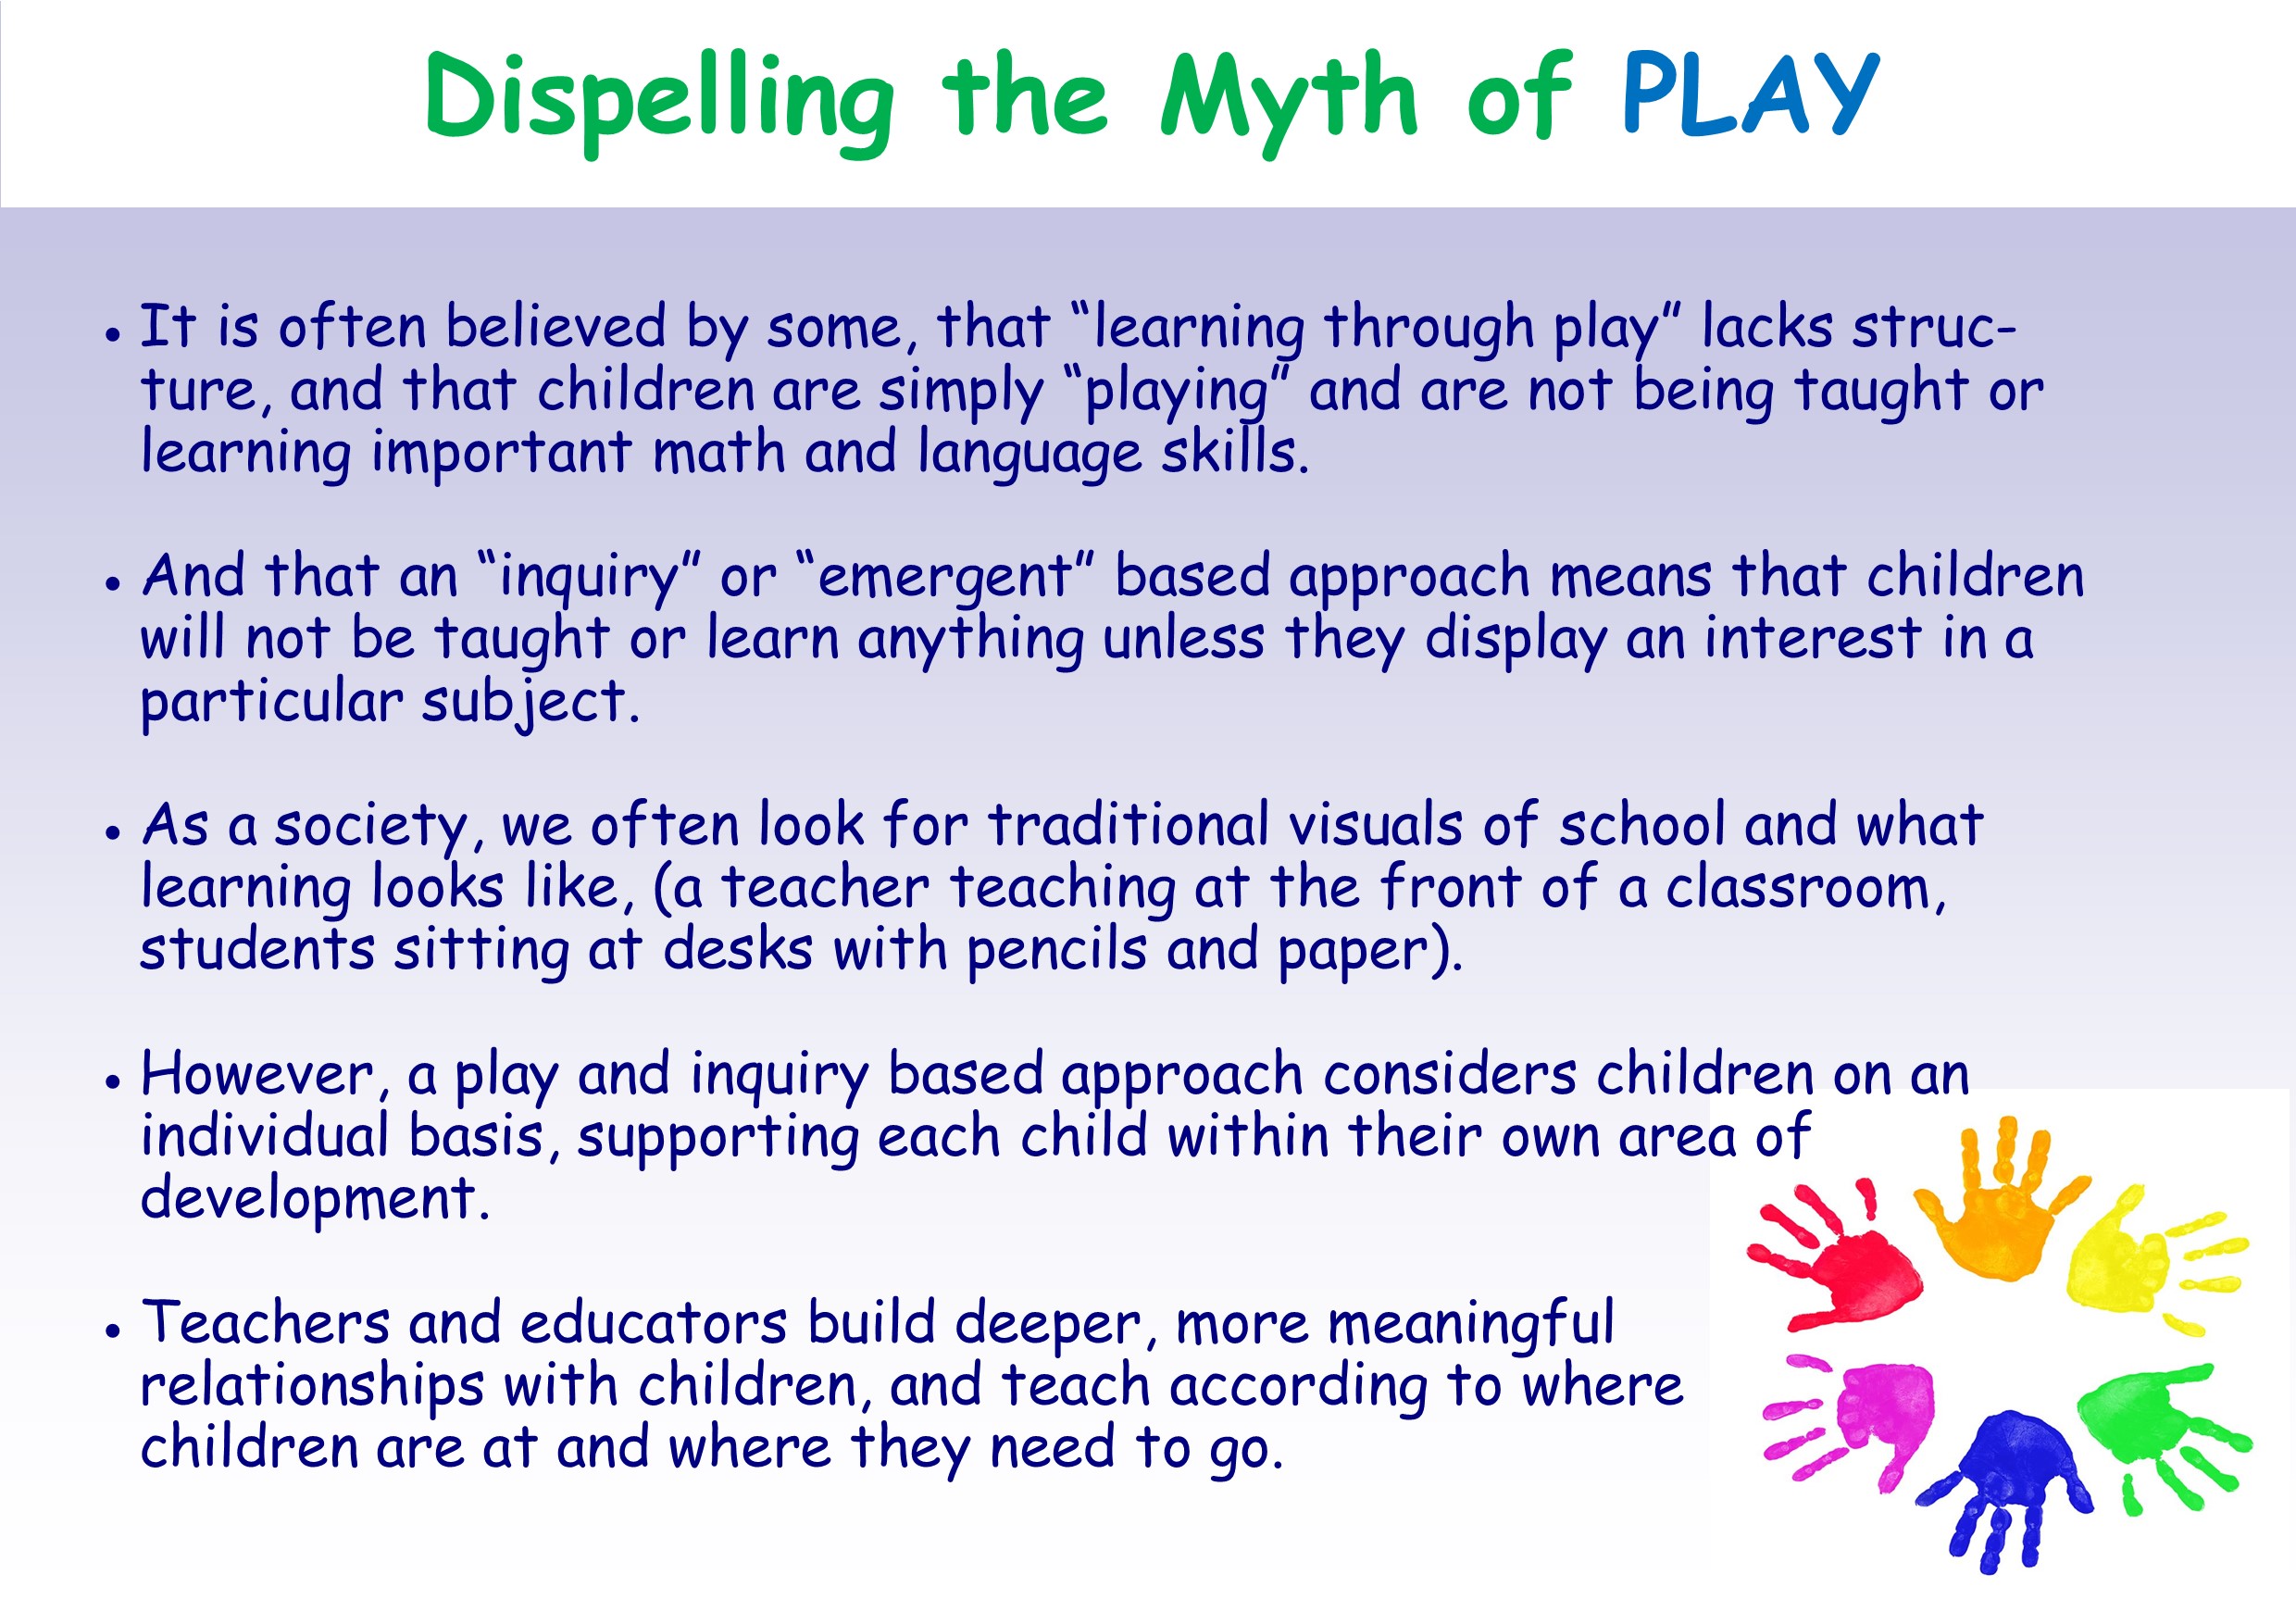 Dispelling the Myth of Play 